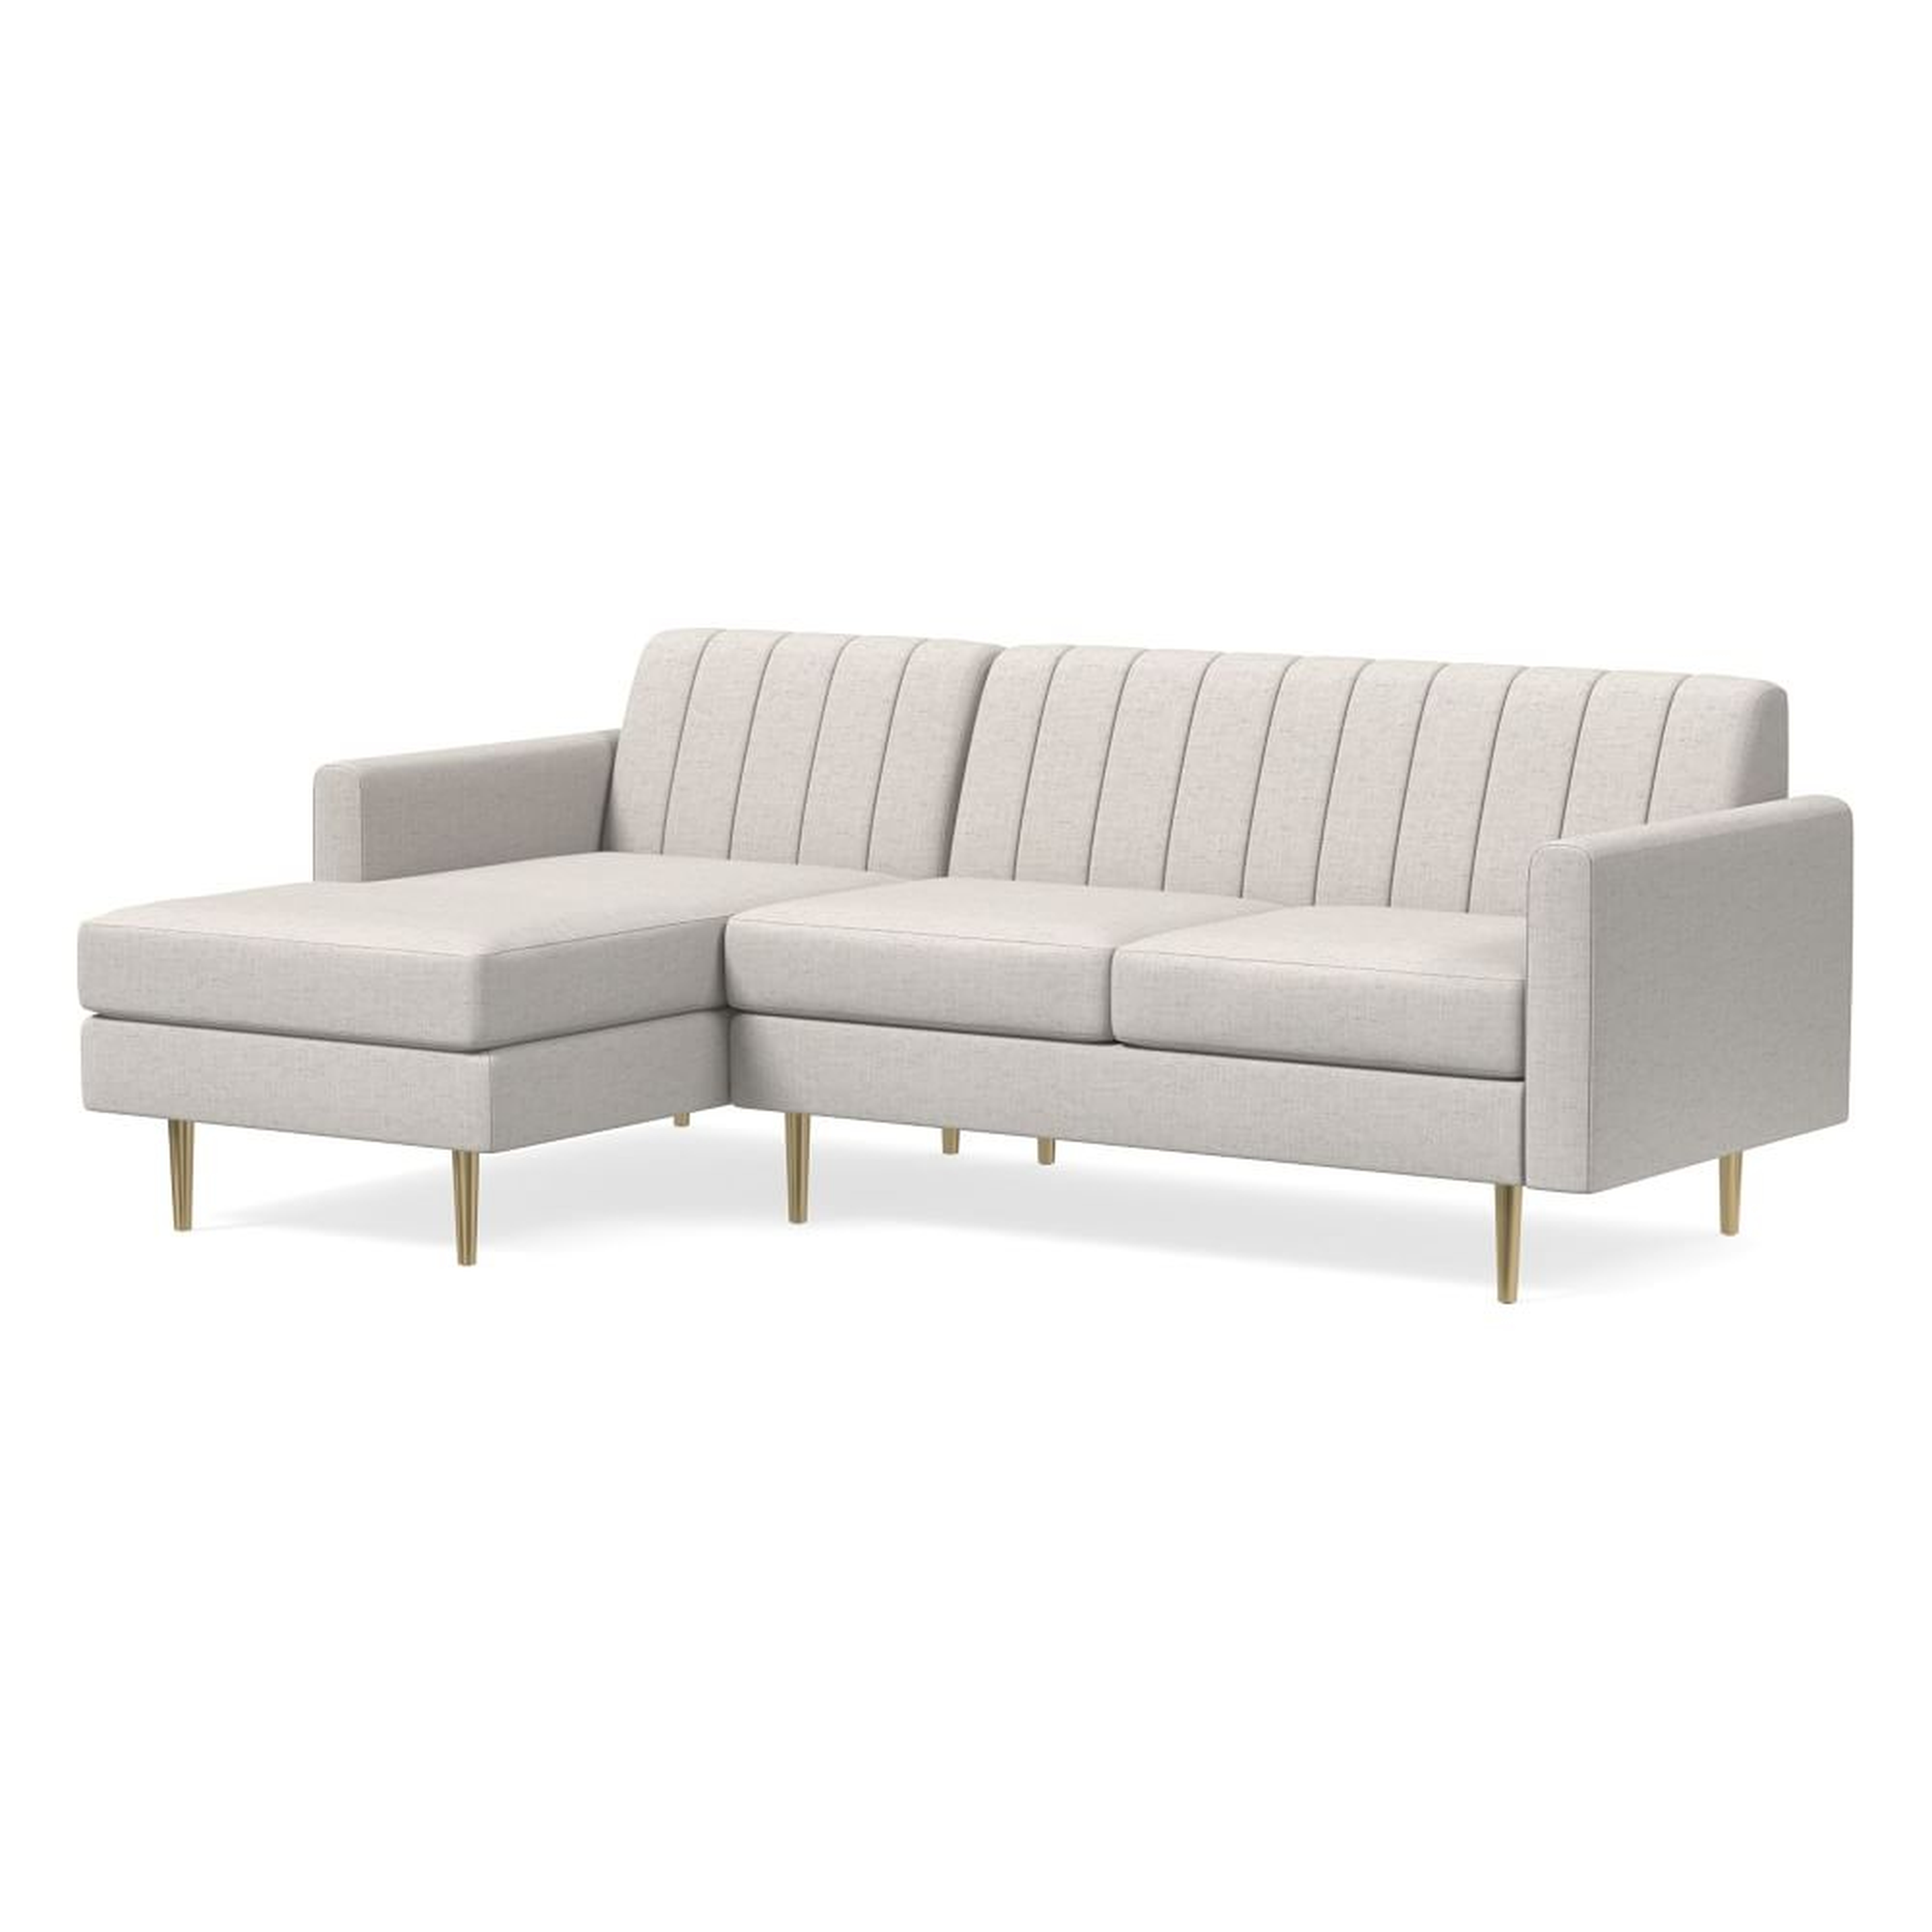 Olive 86" Left Channel Back 2-Piece Chaise Sectional, Mailbox Arm, Performance Coastal Linen, White, Brass - West Elm